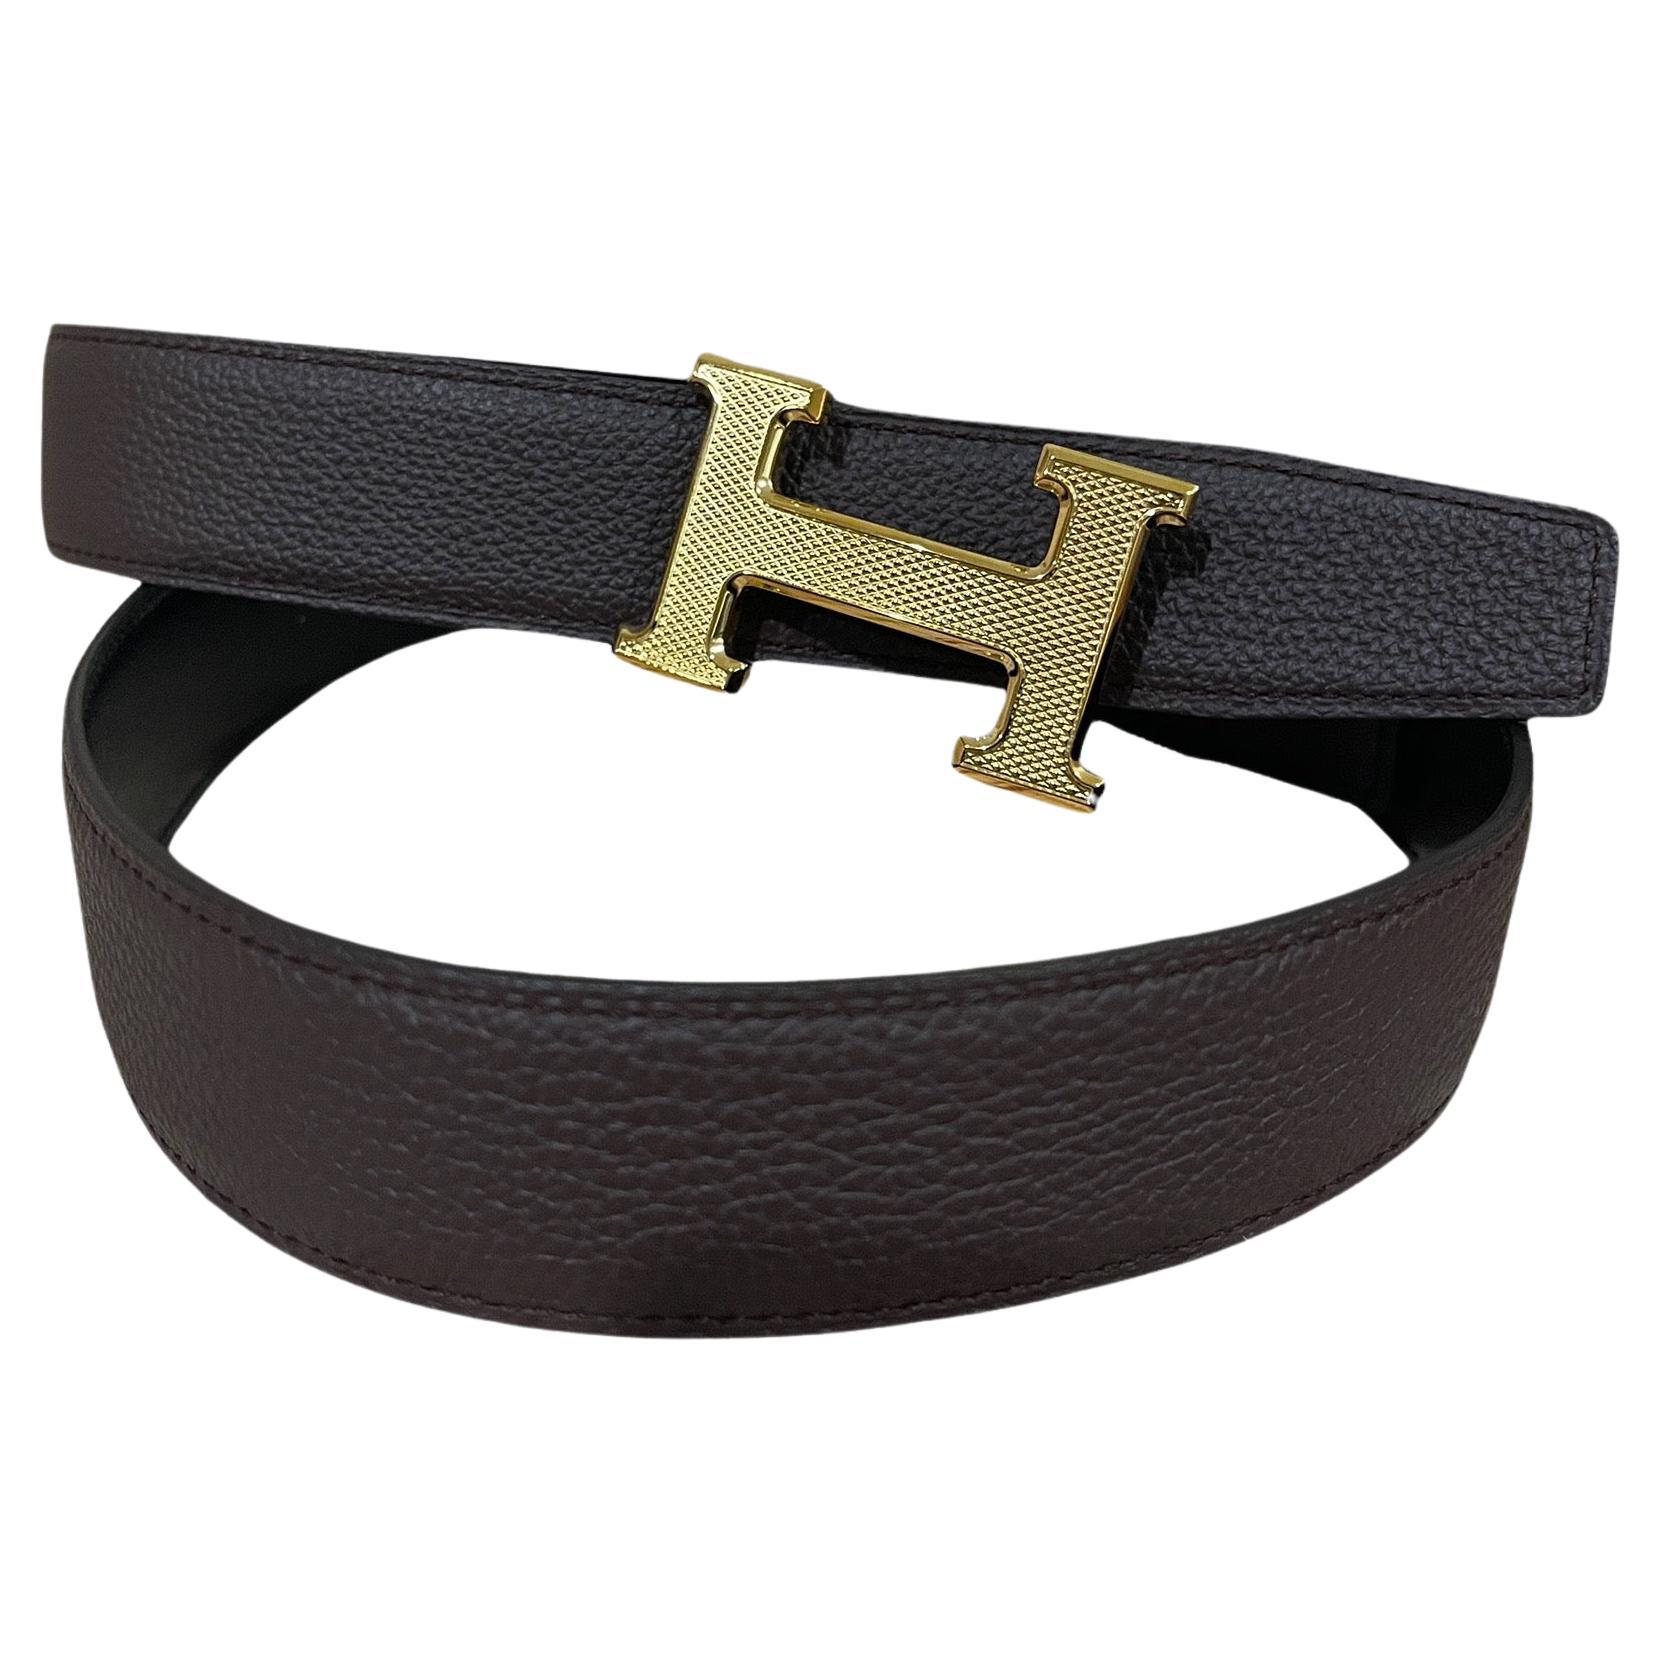 How much are Hermes belts?